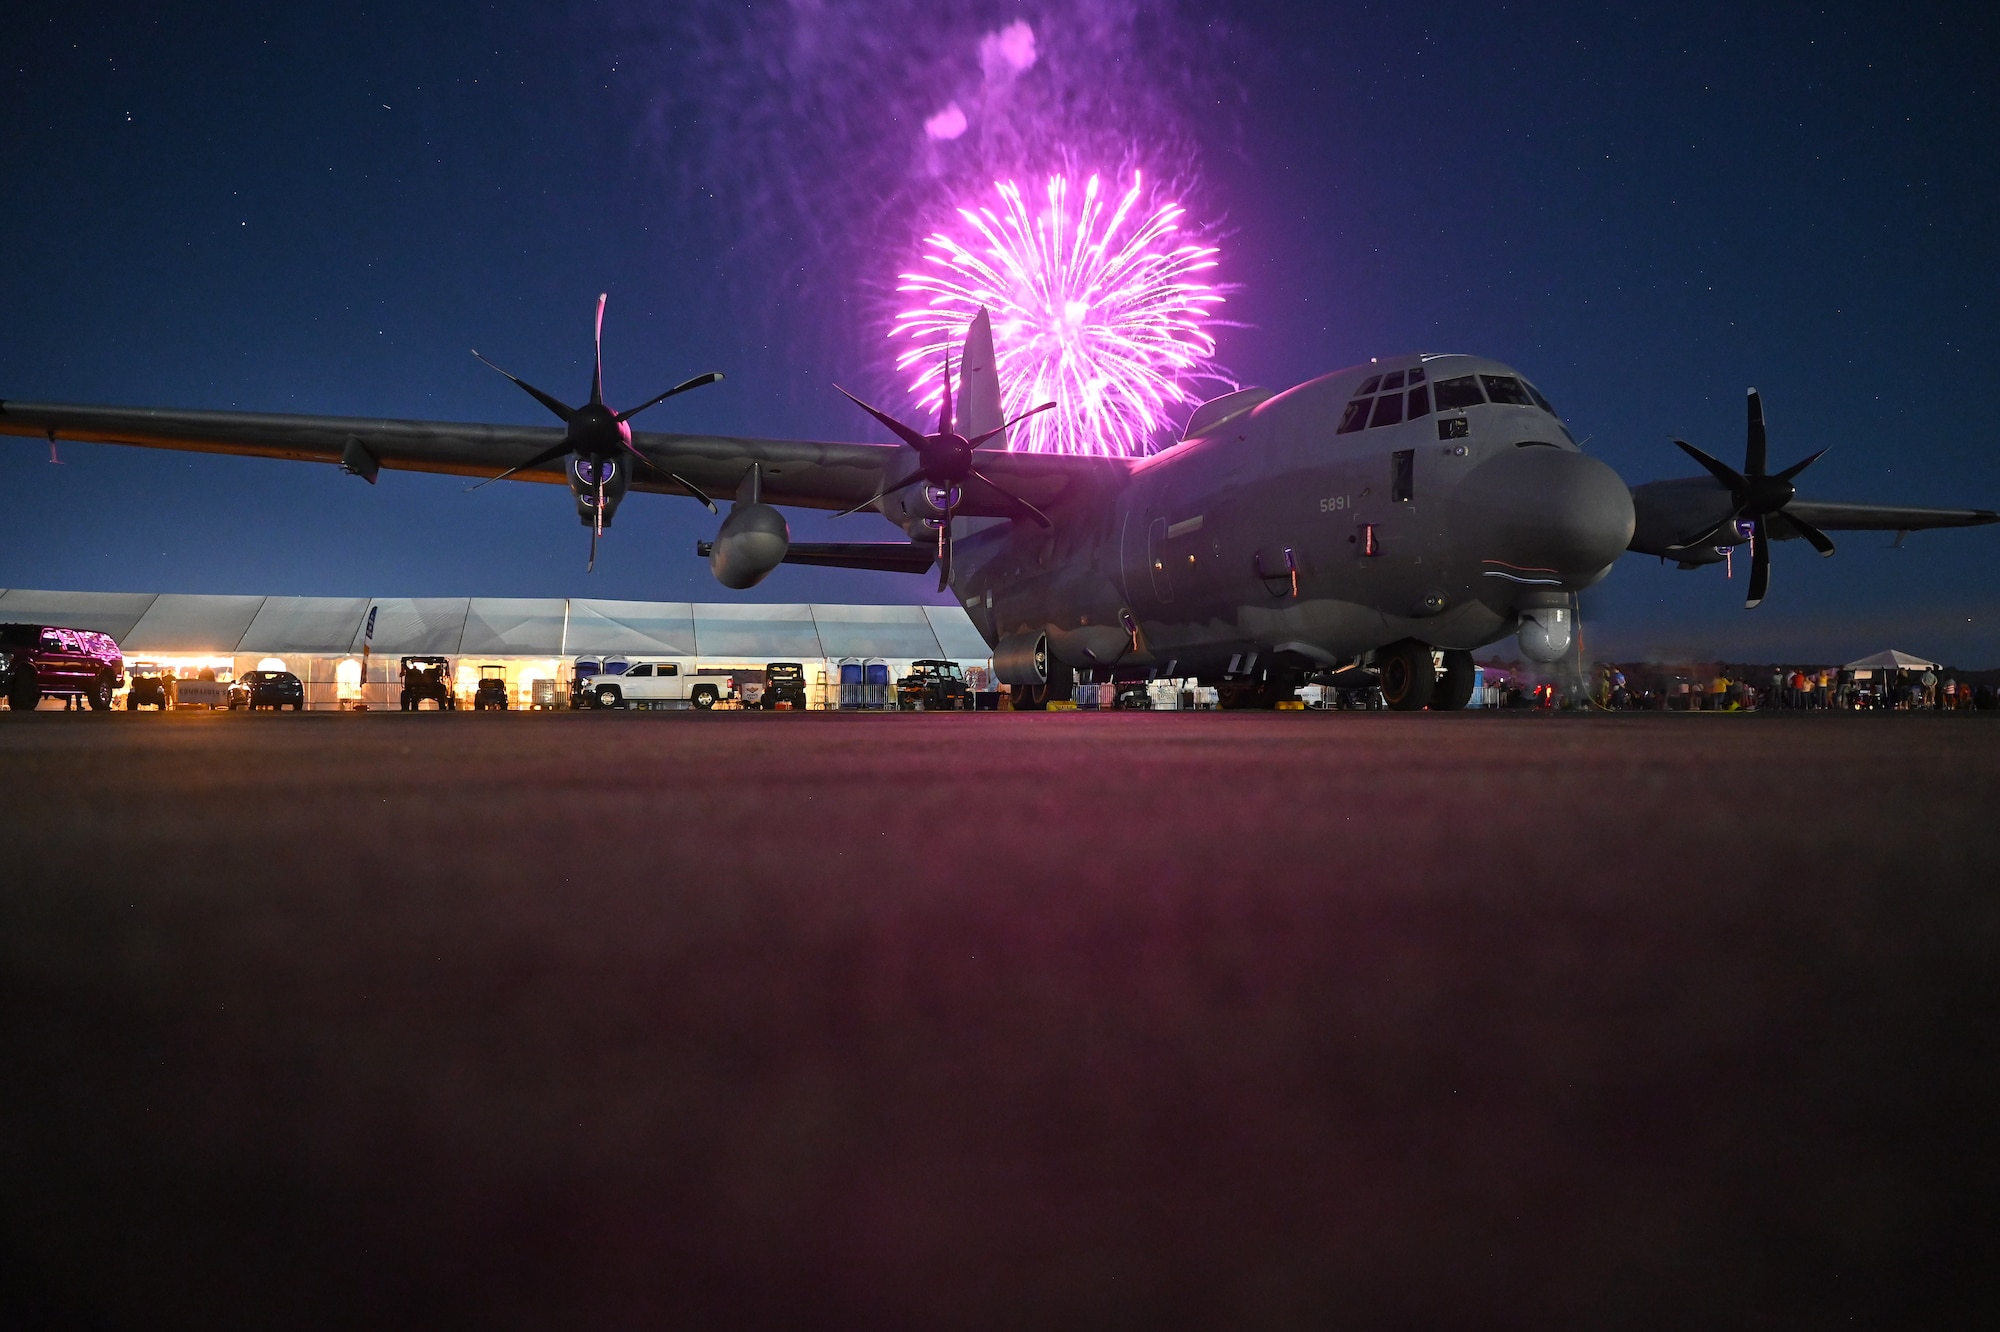 Airshow fireworks in night sky